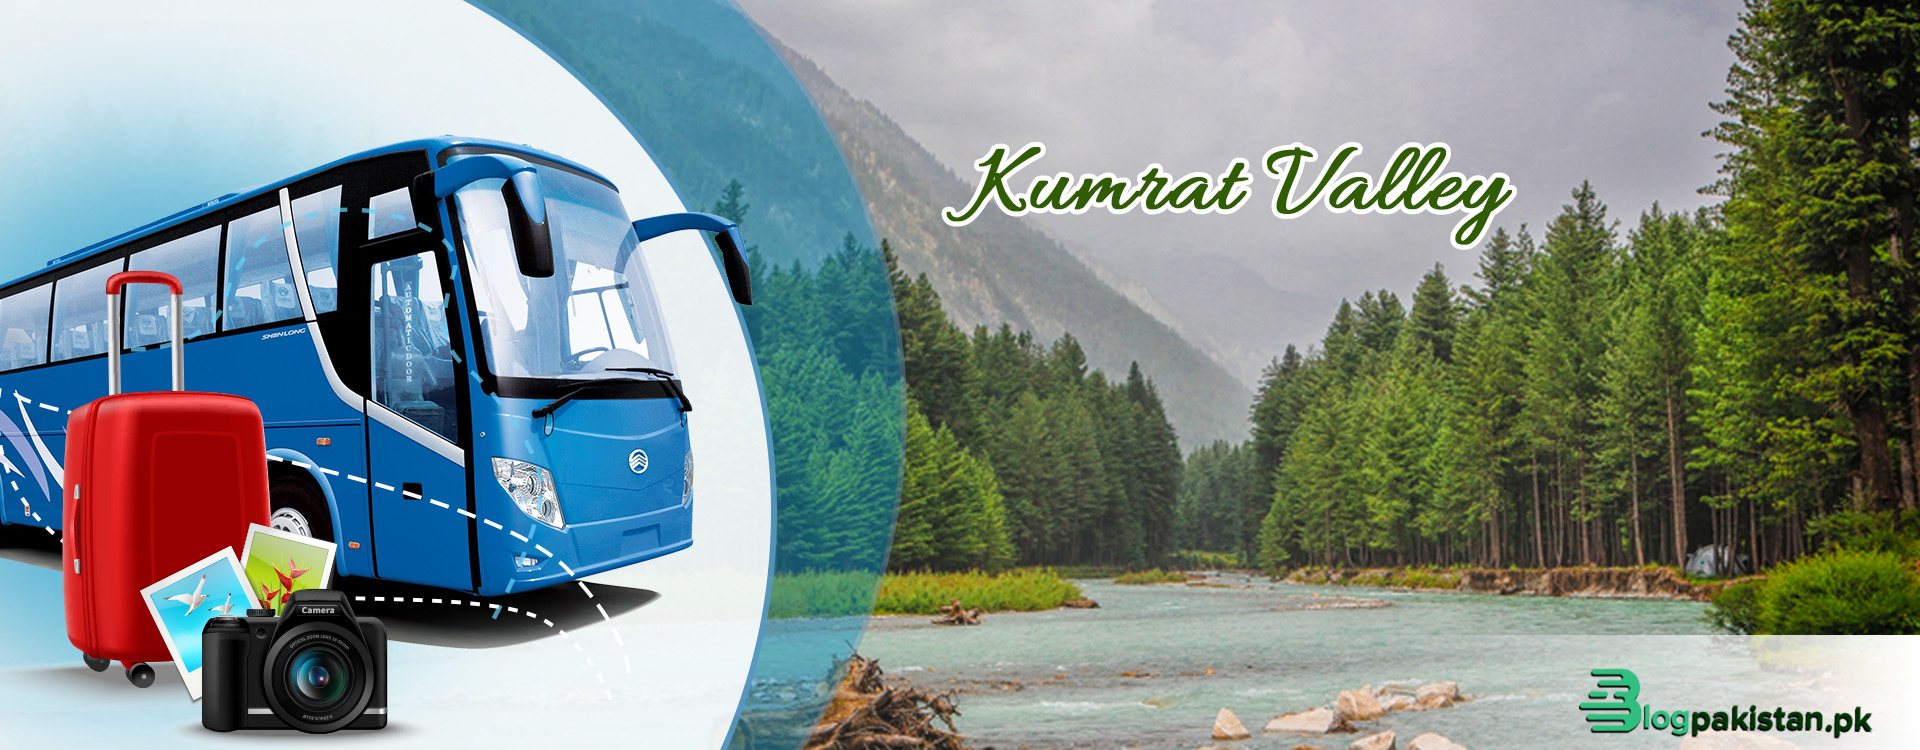 kumrat valley complete tour guide